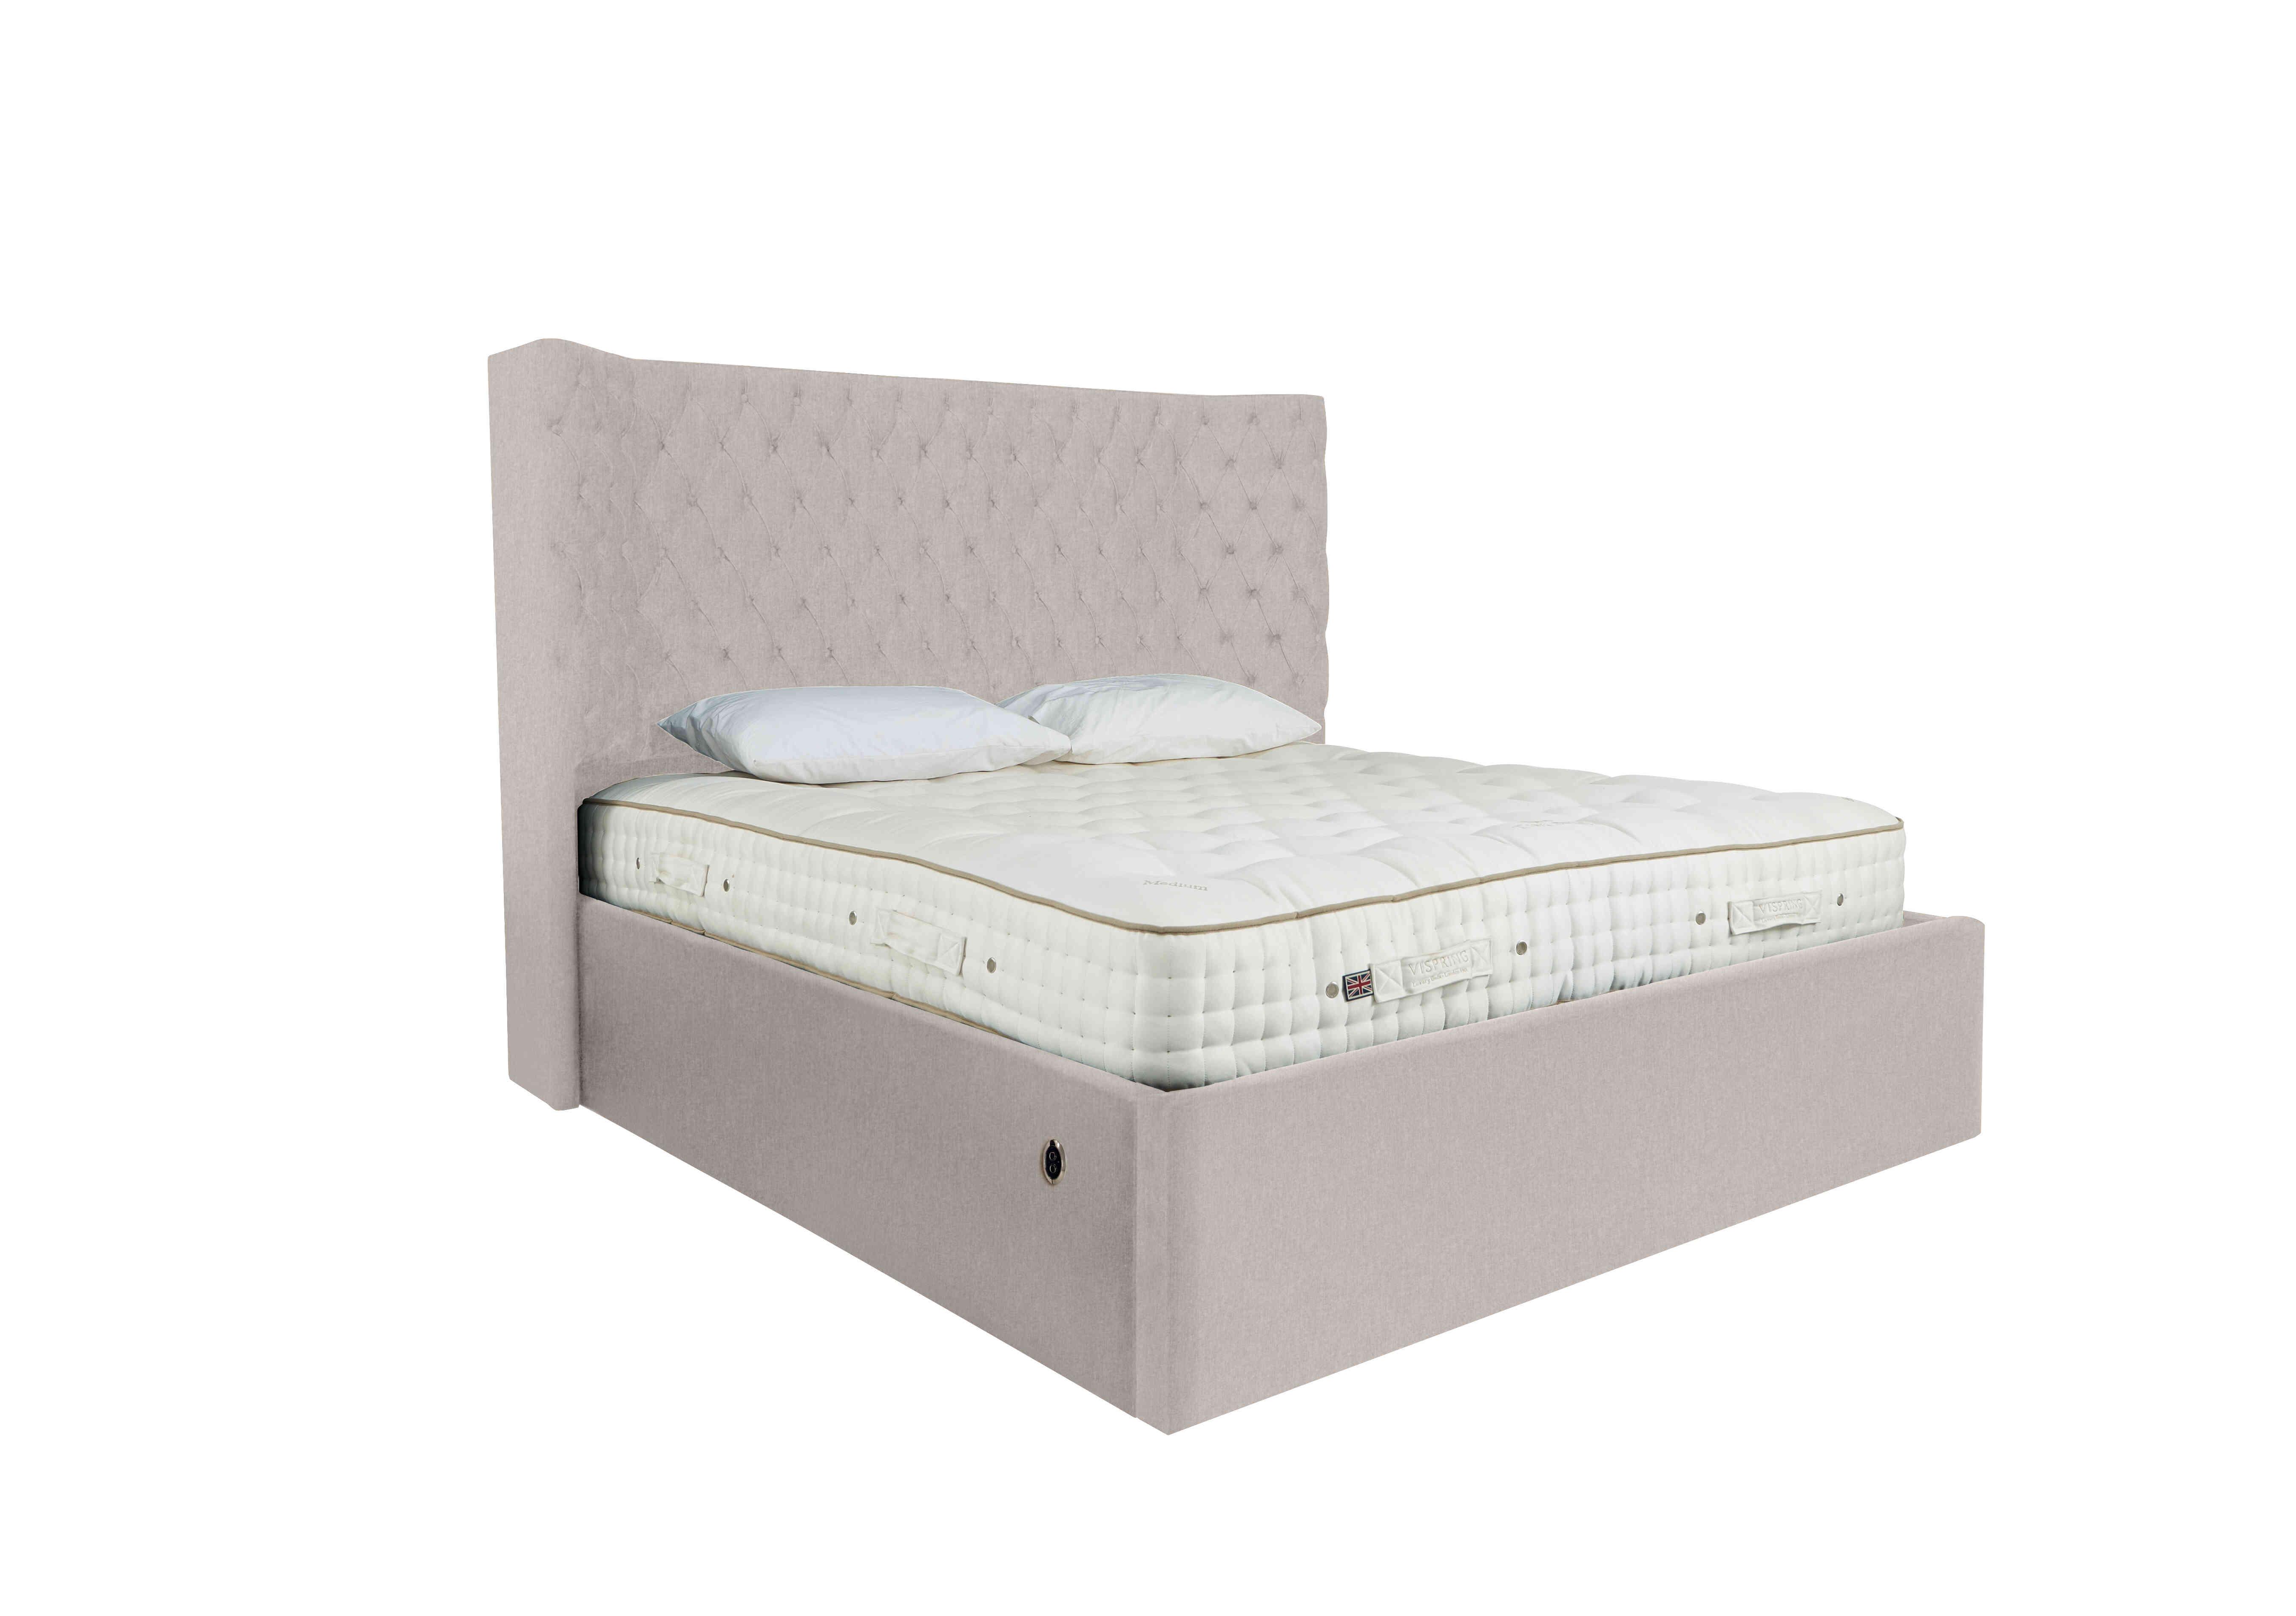 Maximus Electric Ottoman Bed Frame in Linnet Clay on Furniture Village